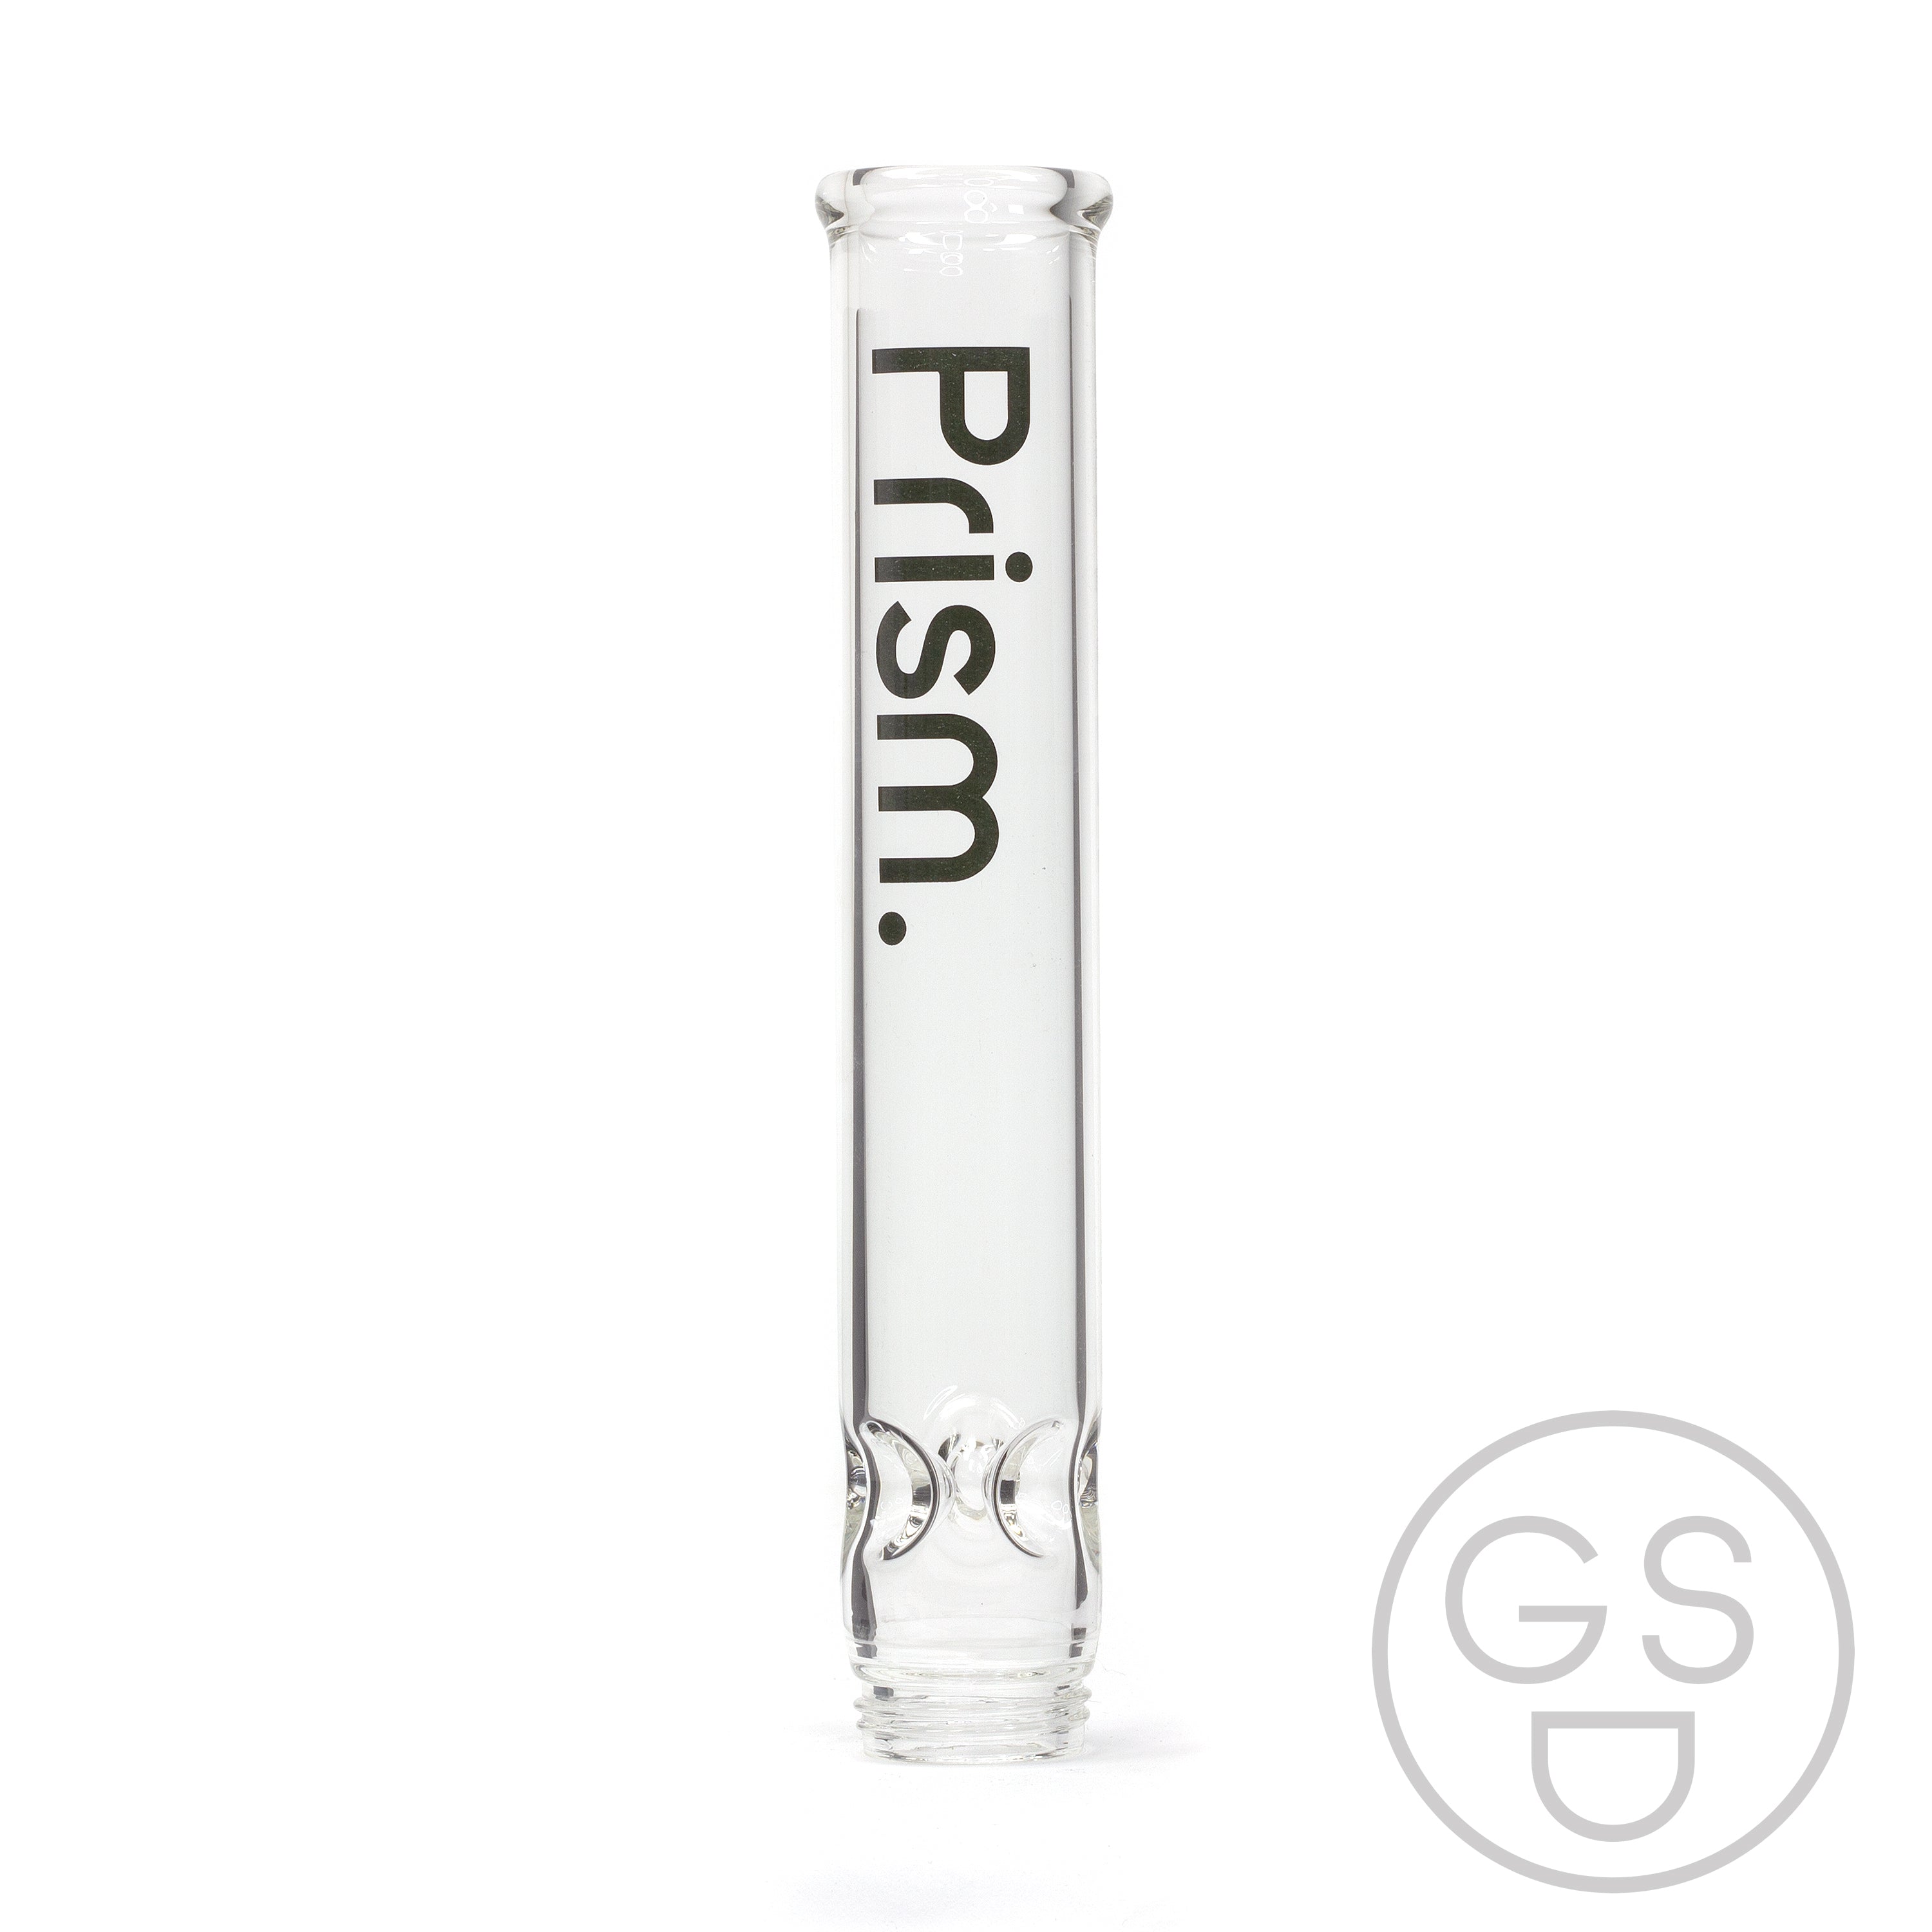 Prism Modular Waterpipe Tall Mouthpiece - Prism / Clear